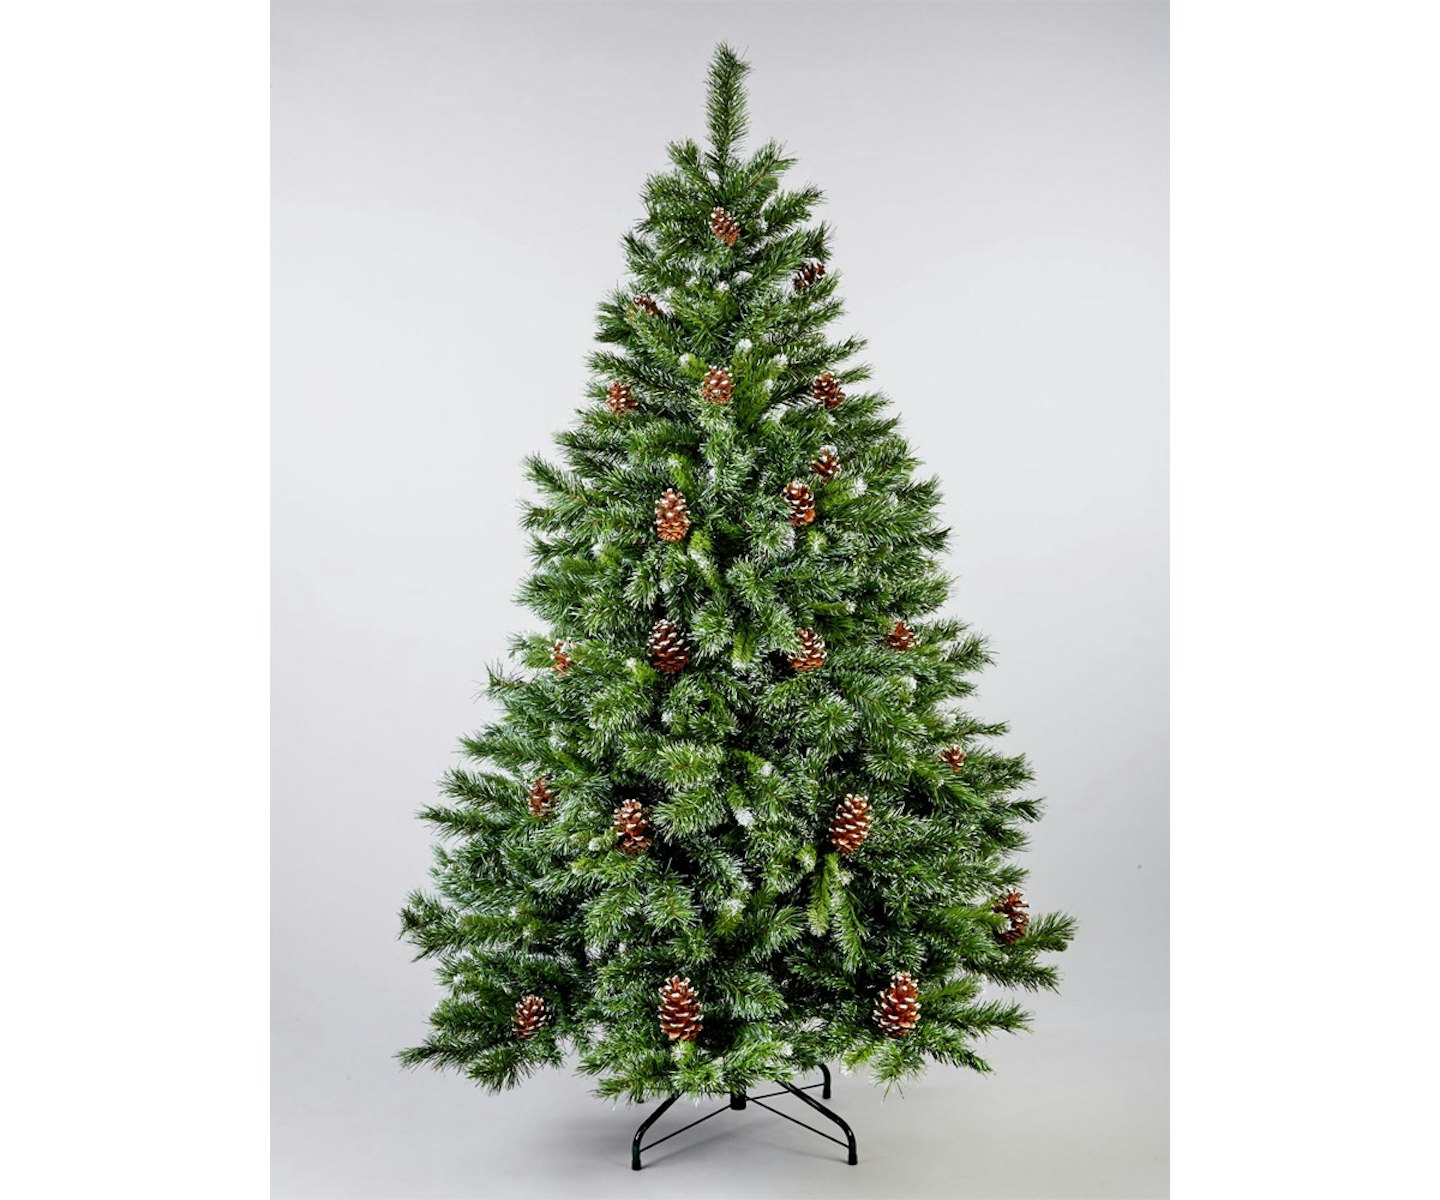 Frosted Snow Queen Christmas Tree - 7ft